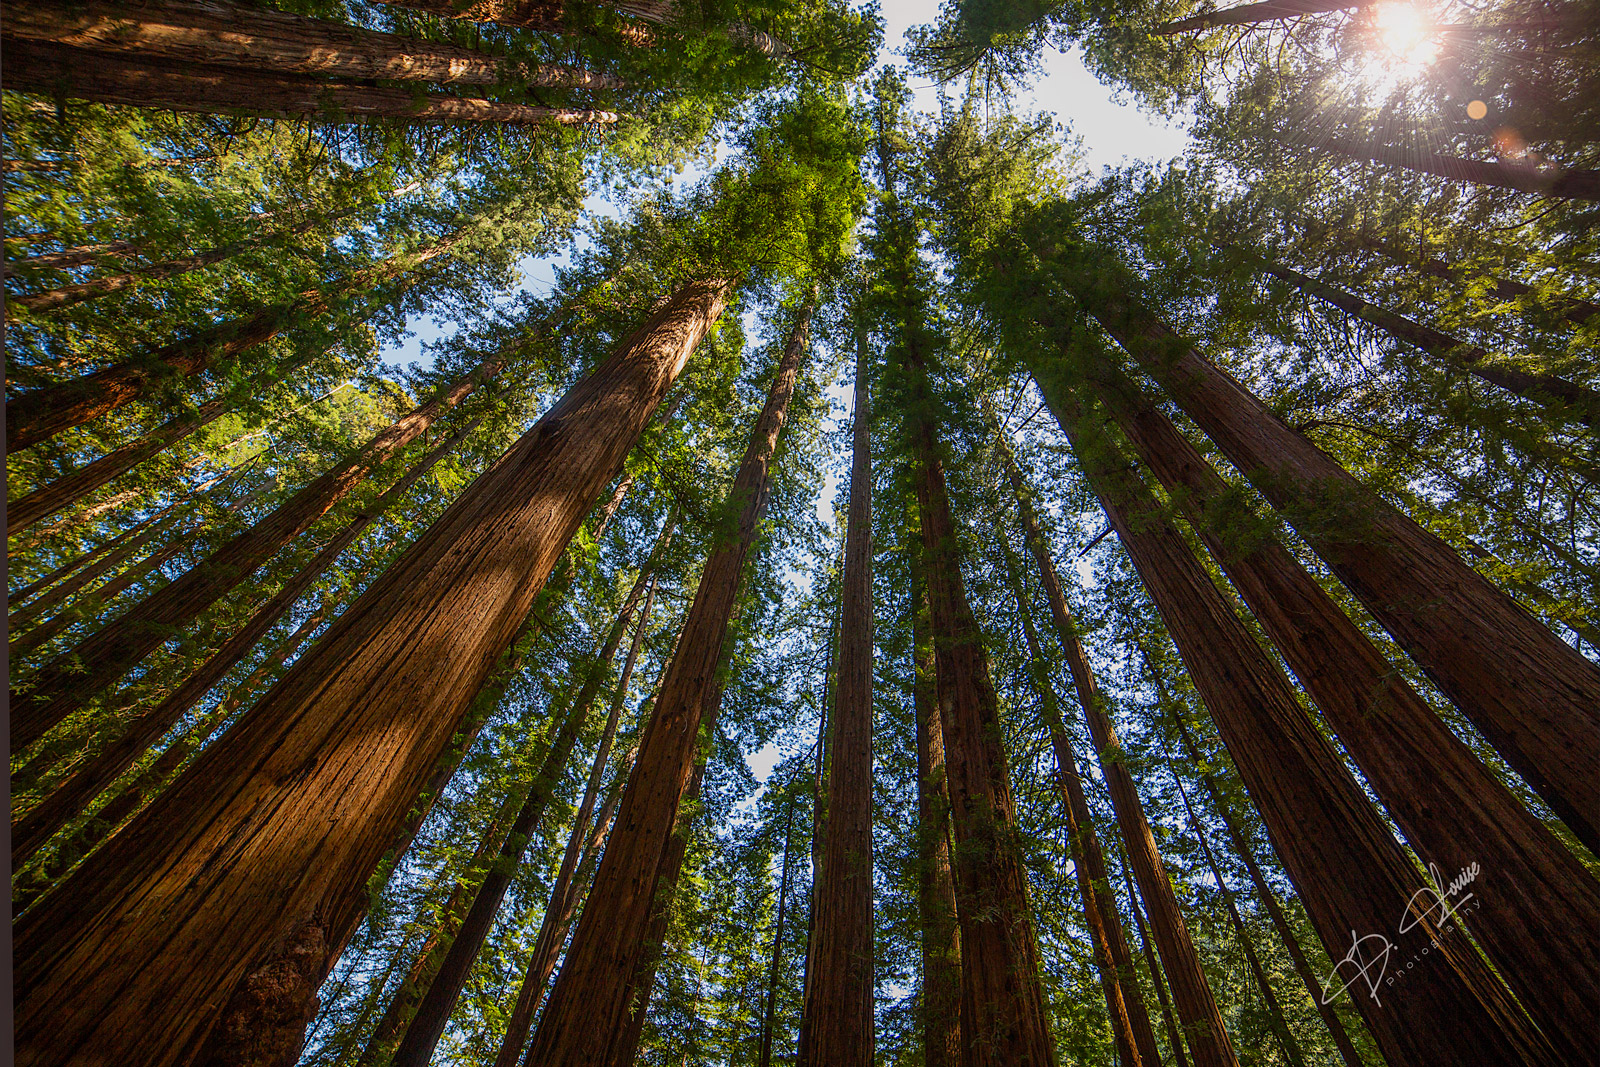 The Towering heights of the California Redwoods